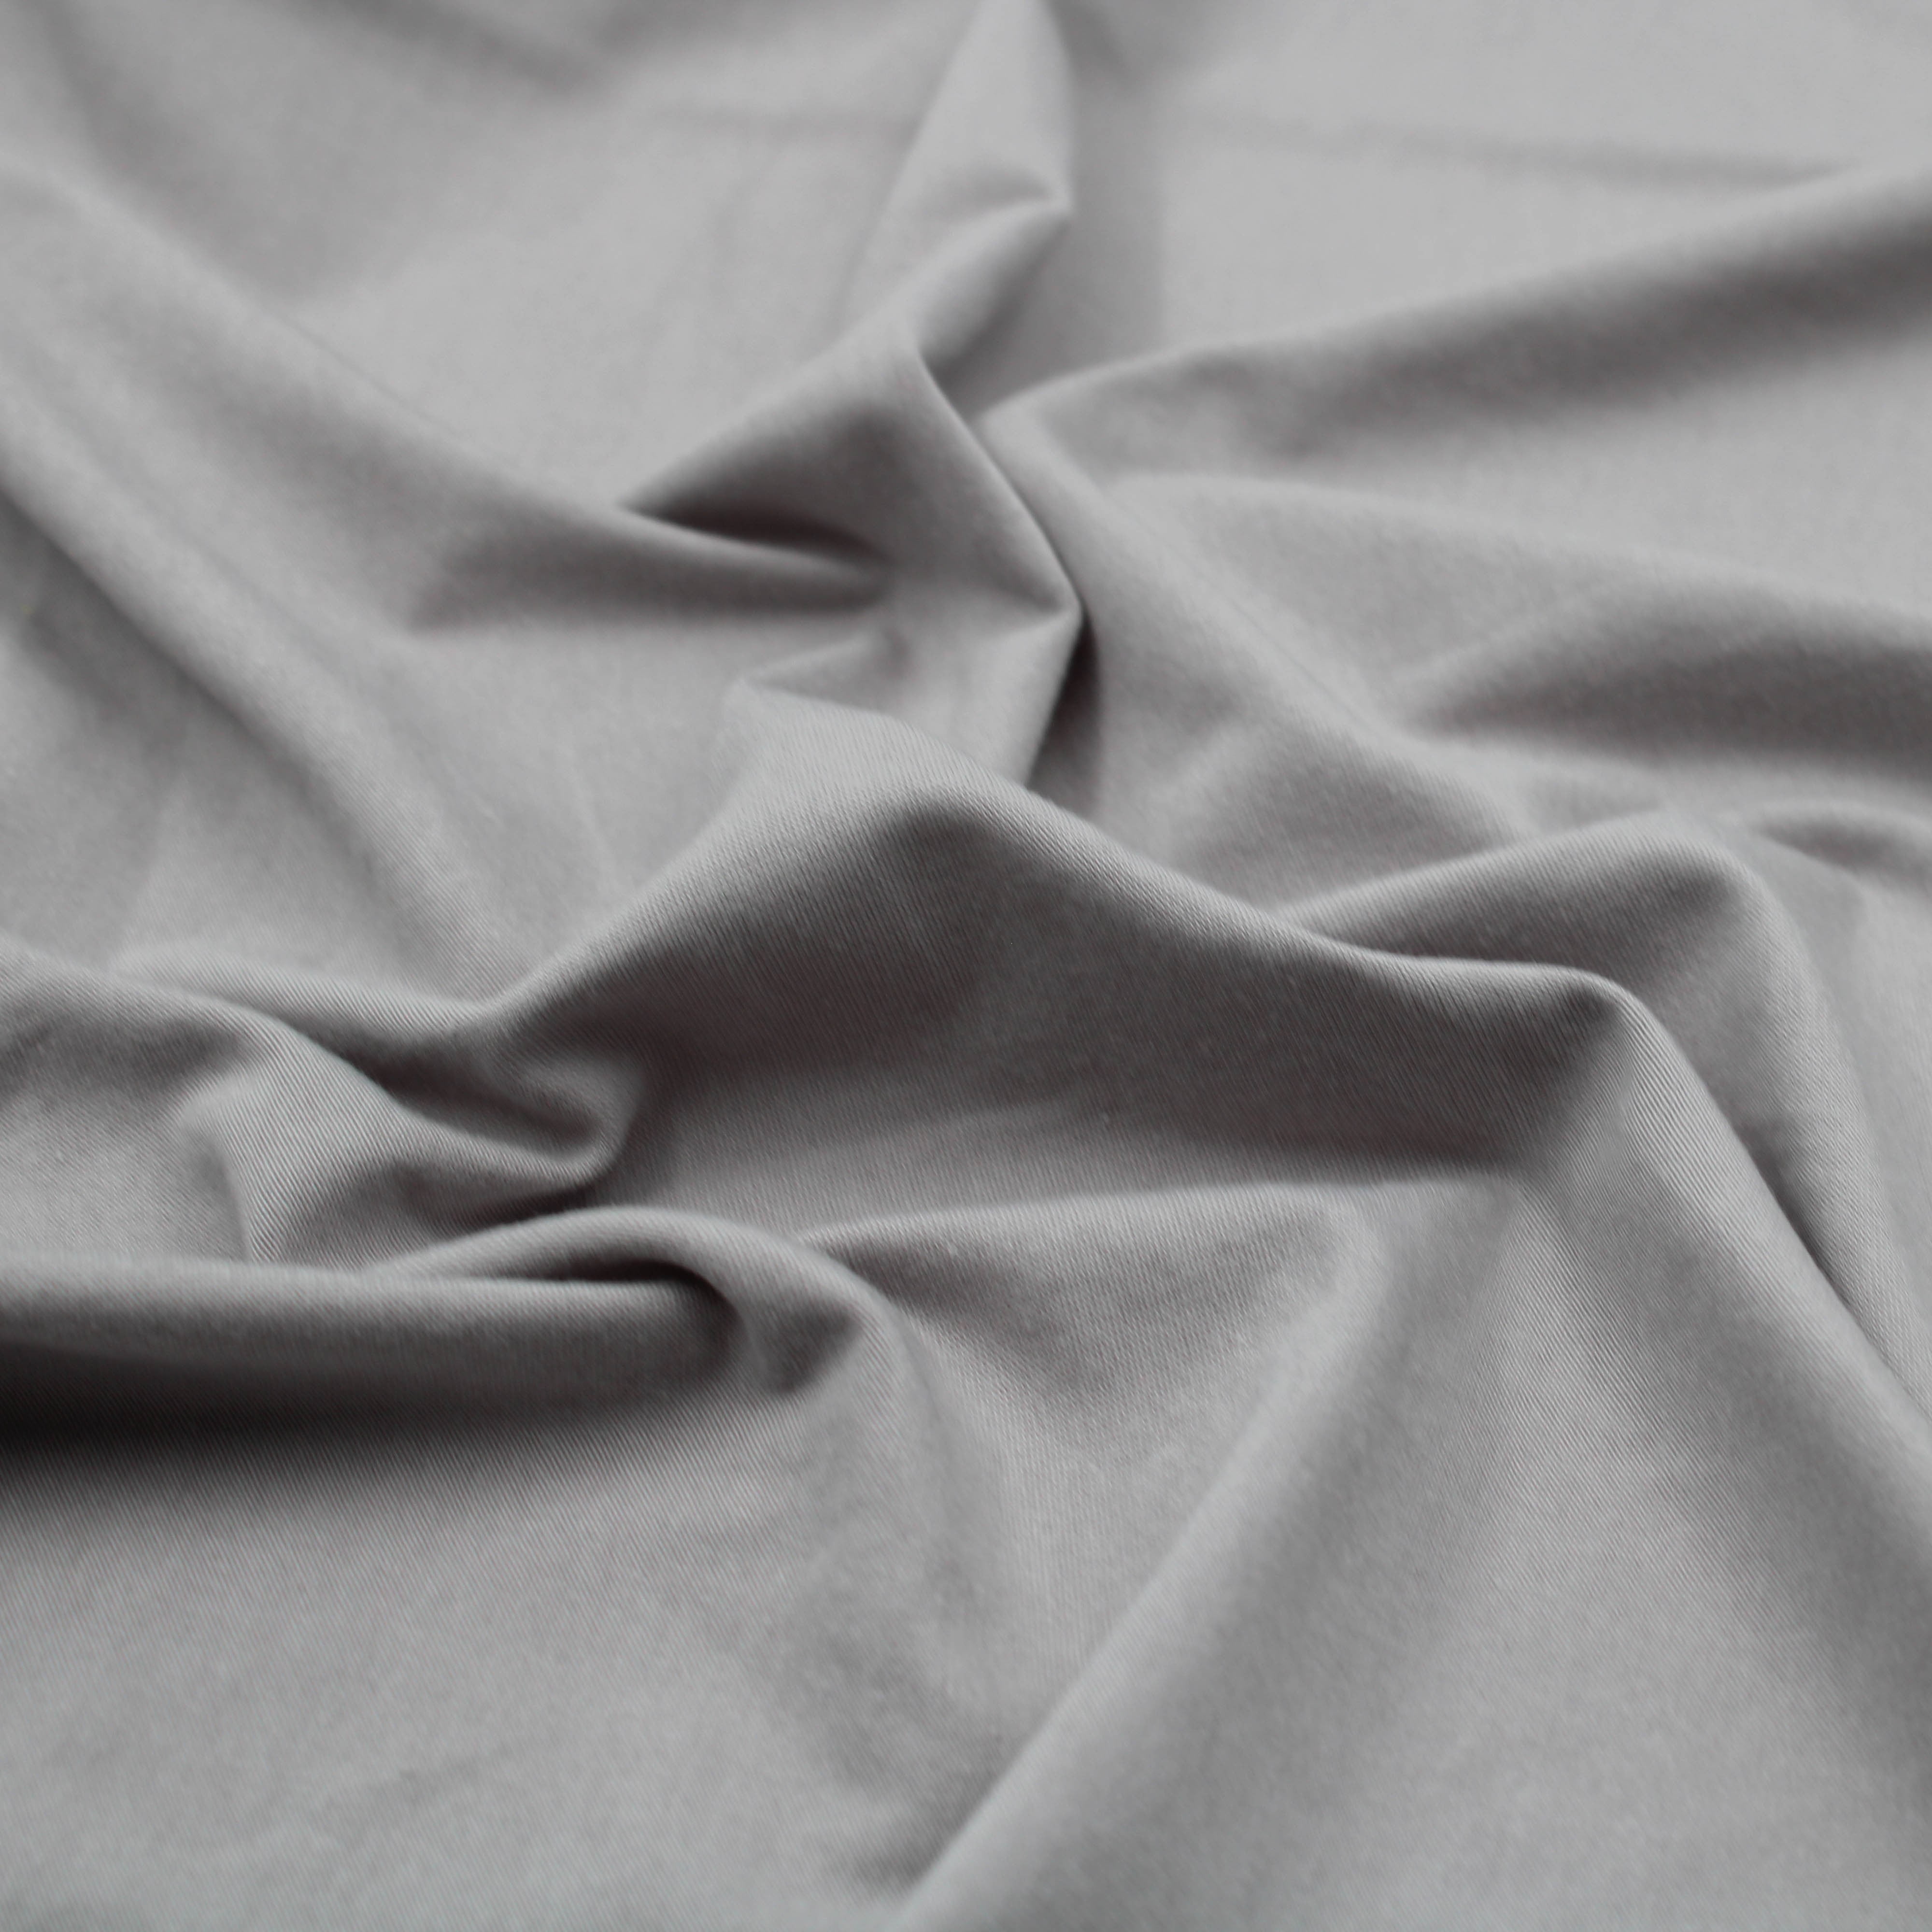 STYLISH FABRIC Gray Light Cotton Modal Fabric, DIY Projects by the